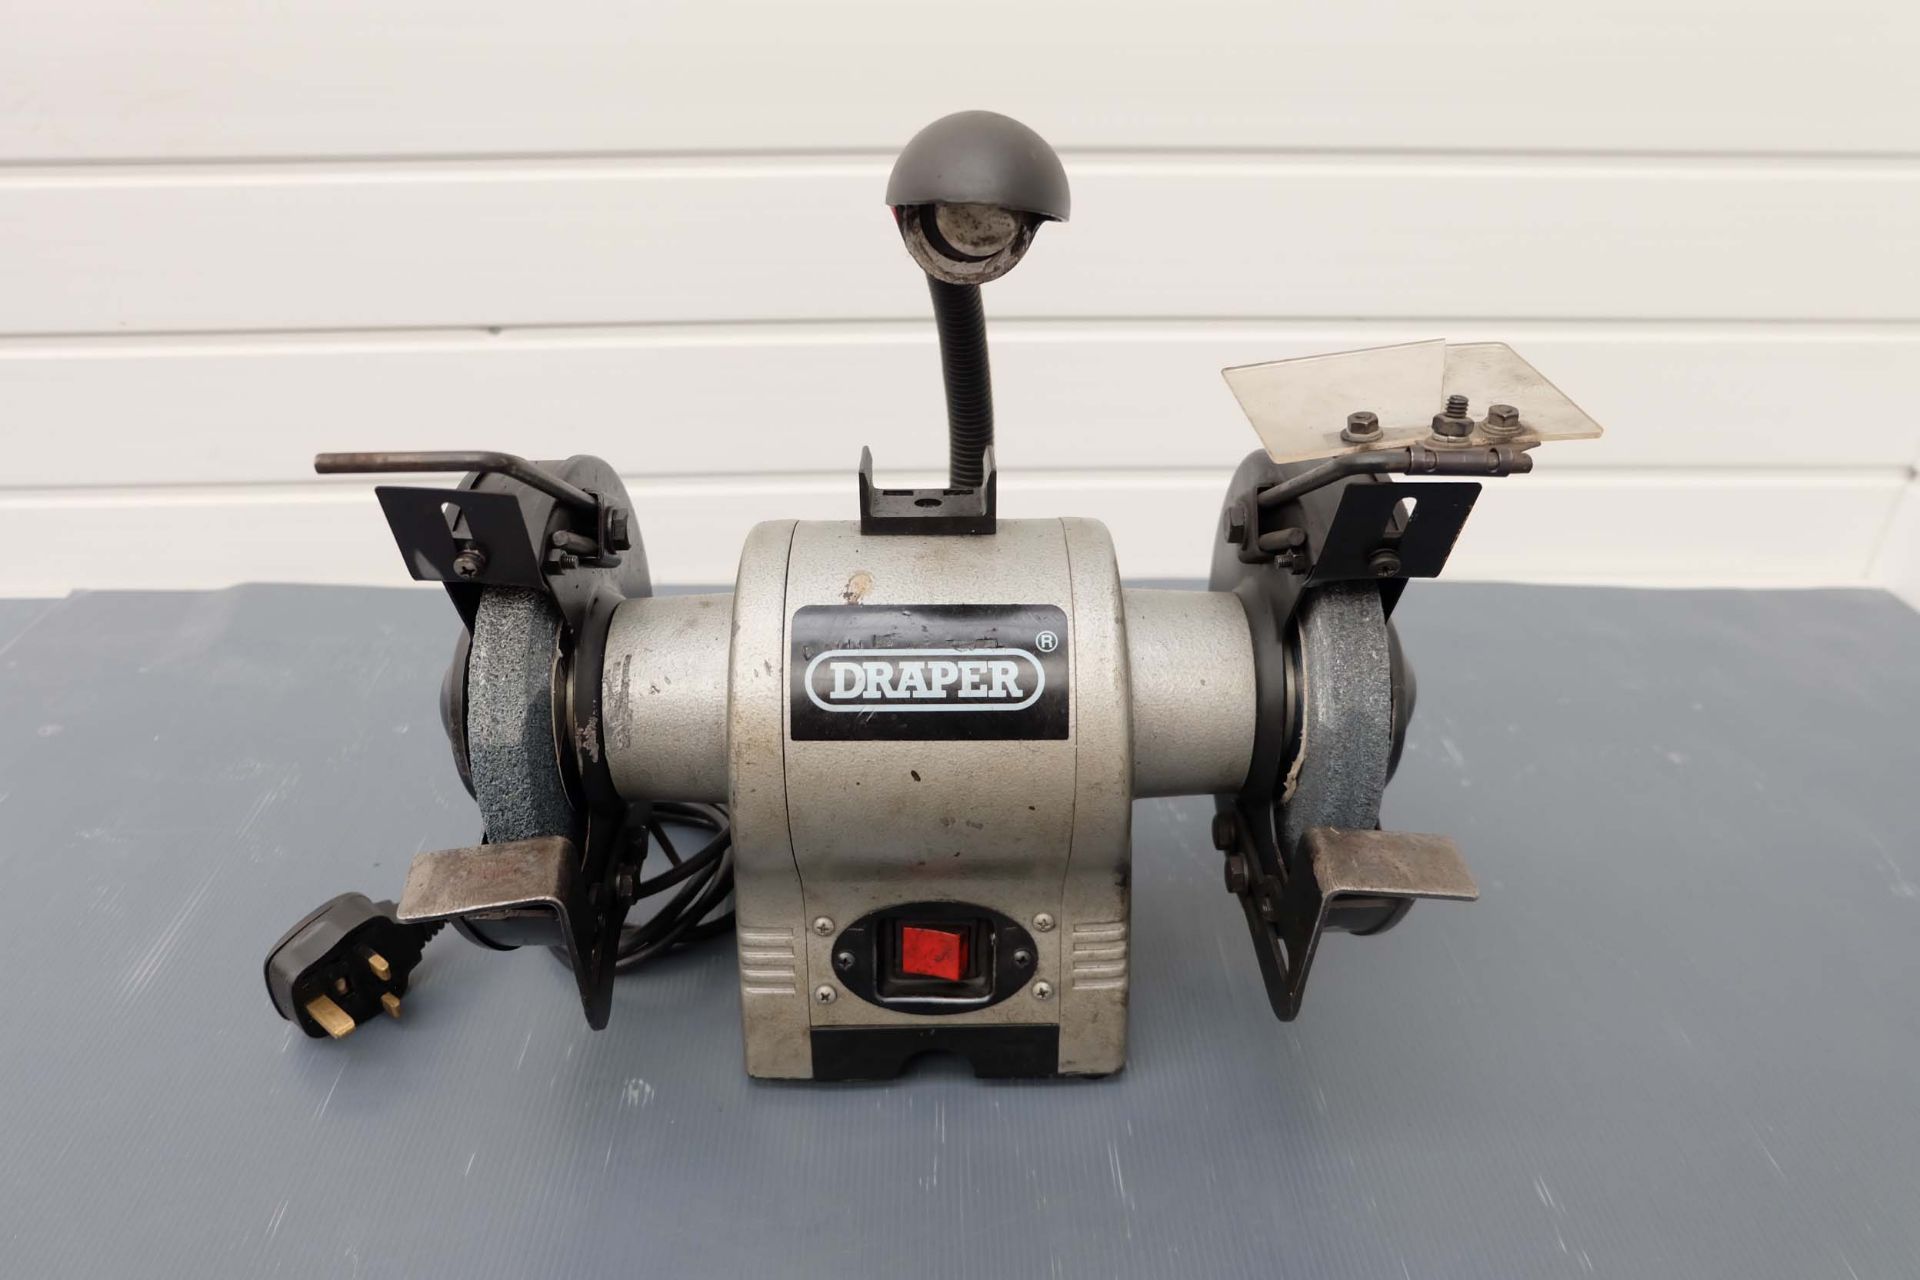 Draper GHD151L Double Ended Bench Grinder. Wheel Size: 150mm. Single Phase 240V